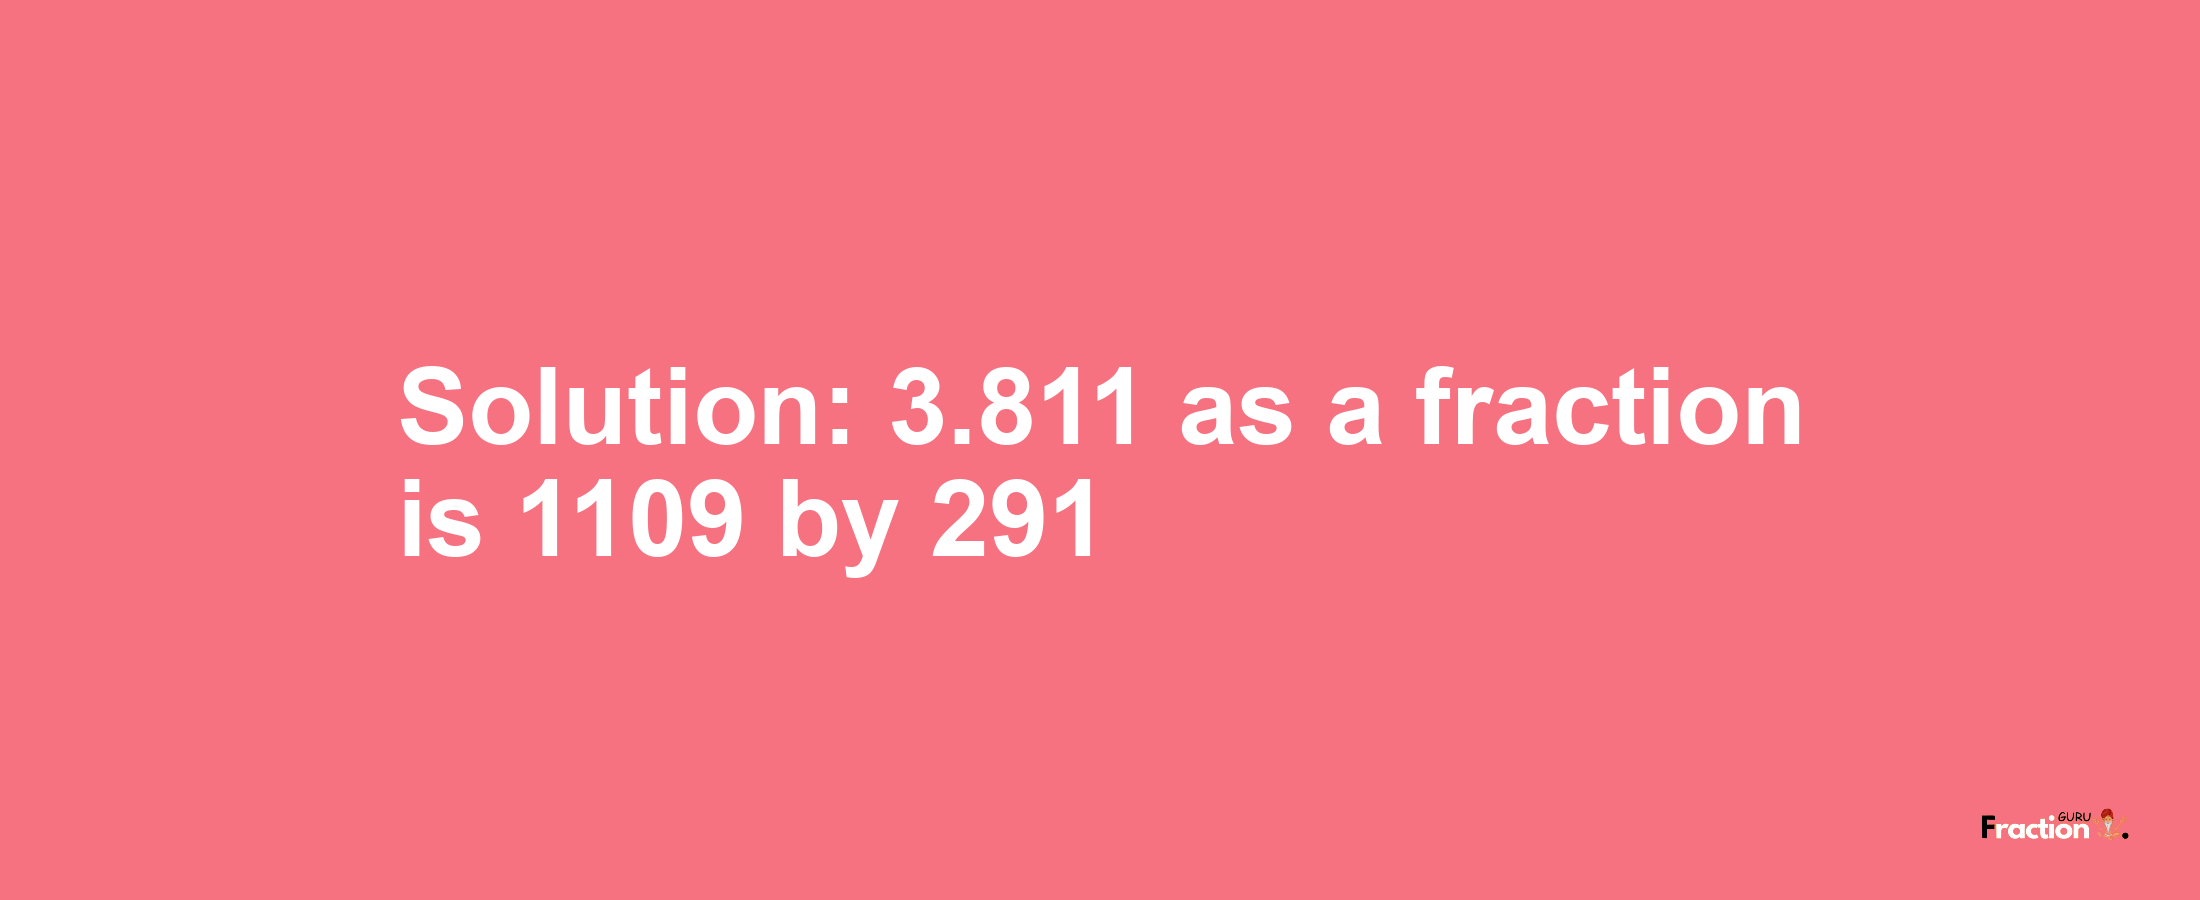 Solution:3.811 as a fraction is 1109/291